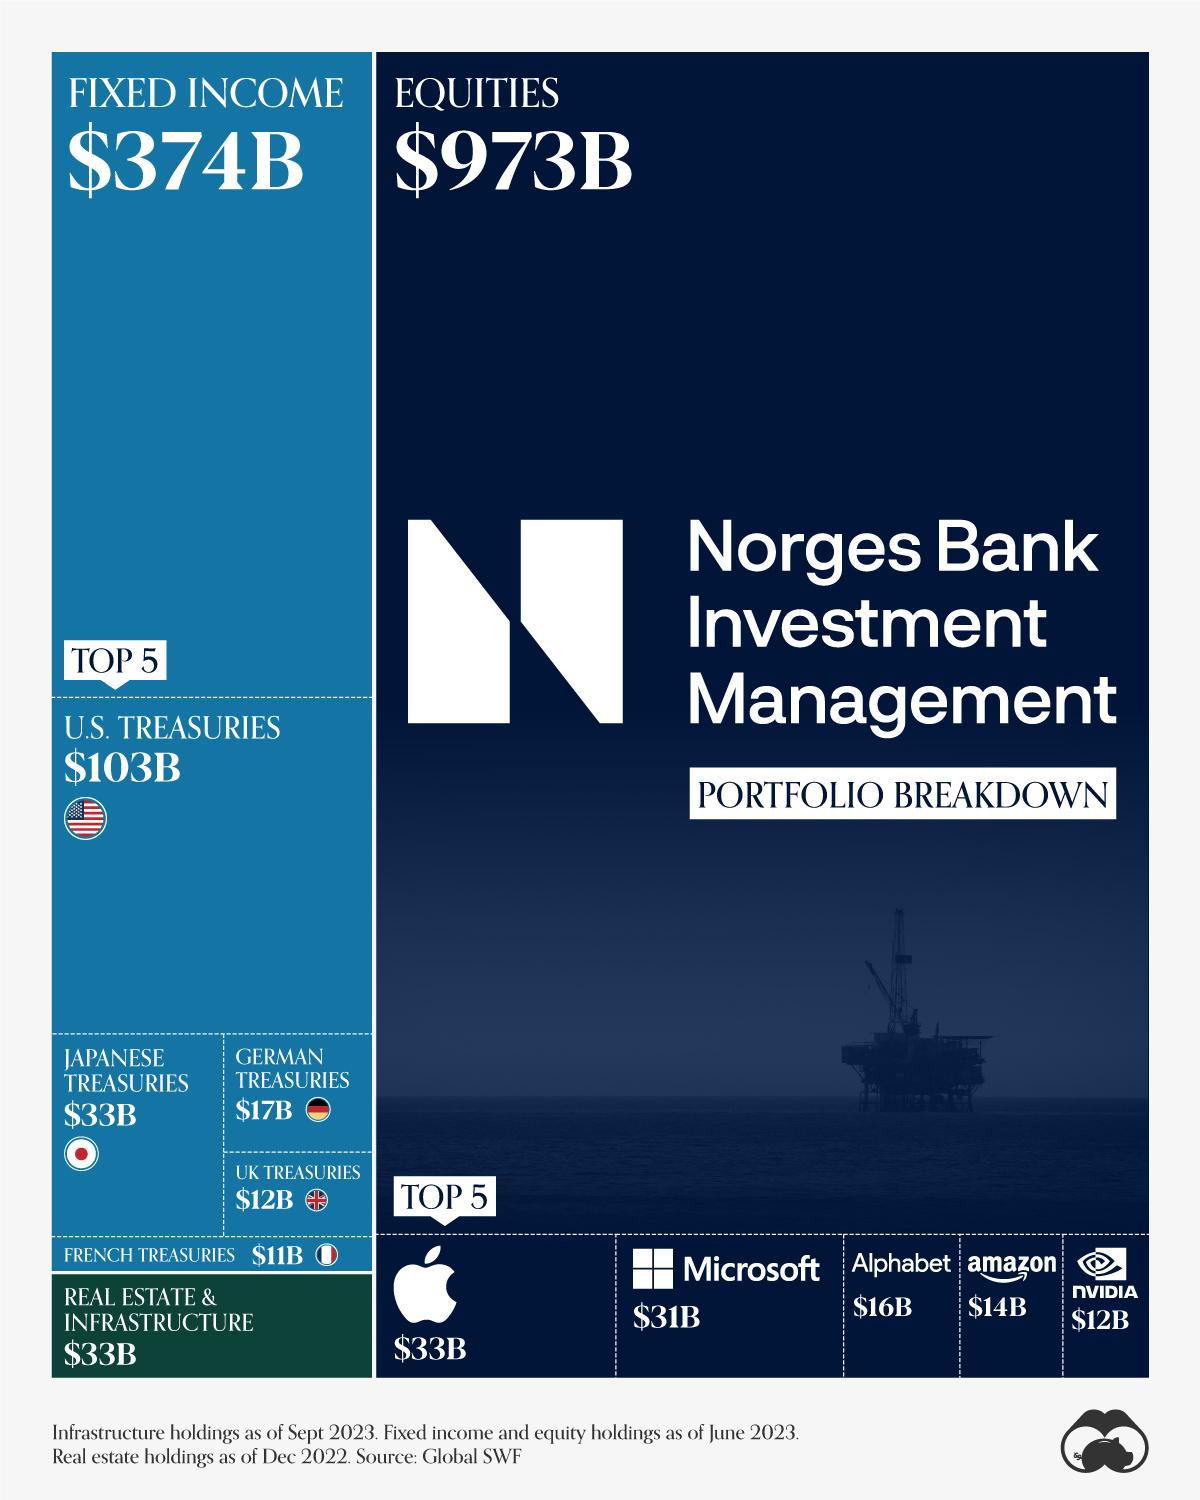 The World's Largest Sovereign Wealth Fund Has $1.4 Trillion in Assets 🇳🇴